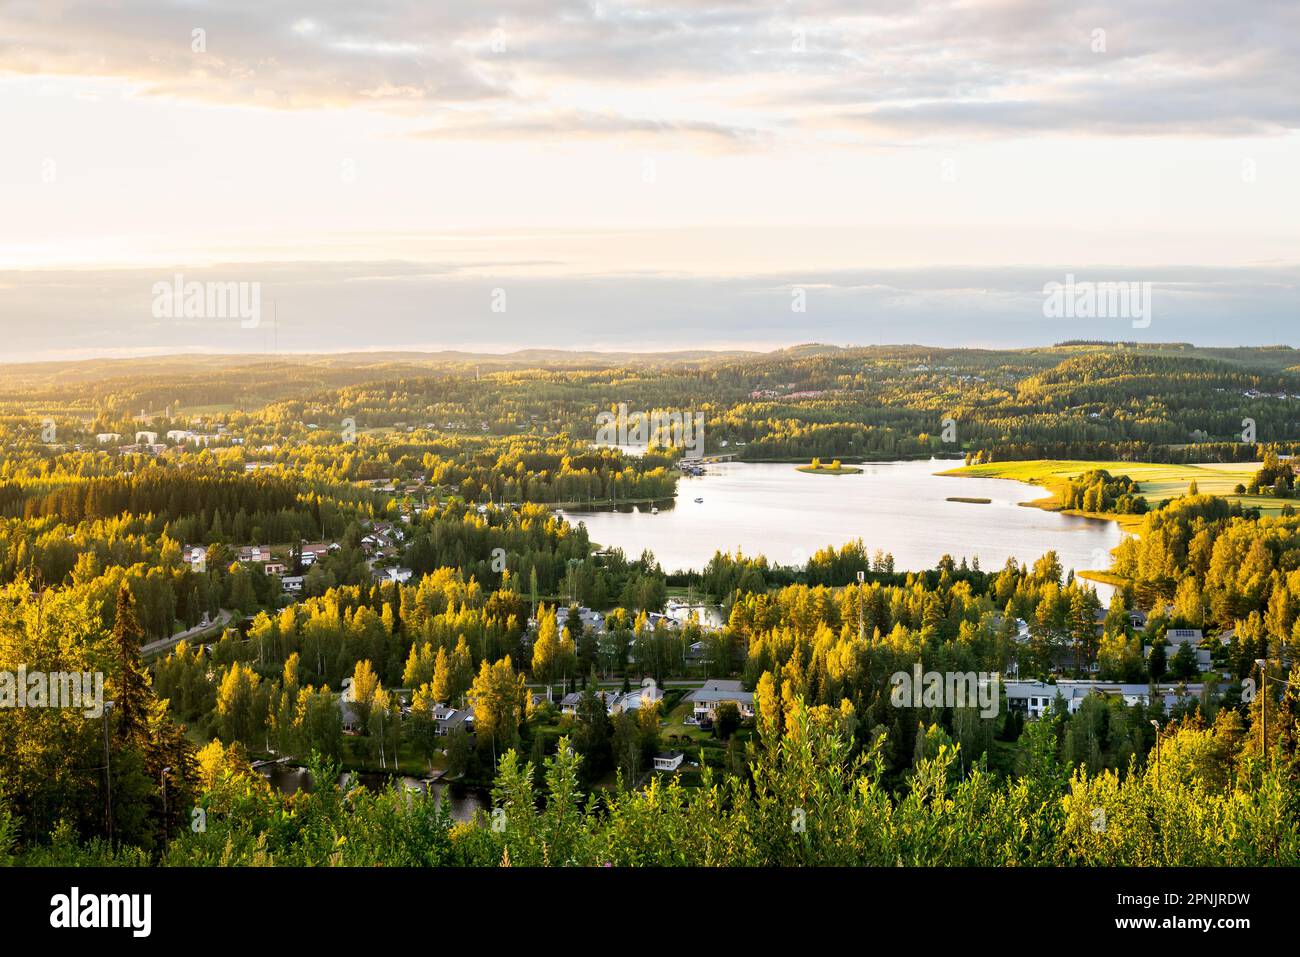 Forest and lake in Finland. Finnish nature in summer. Beautiful landscape and aerial view to town at sunset. Nordic country outdoor scenery. Stock Photo